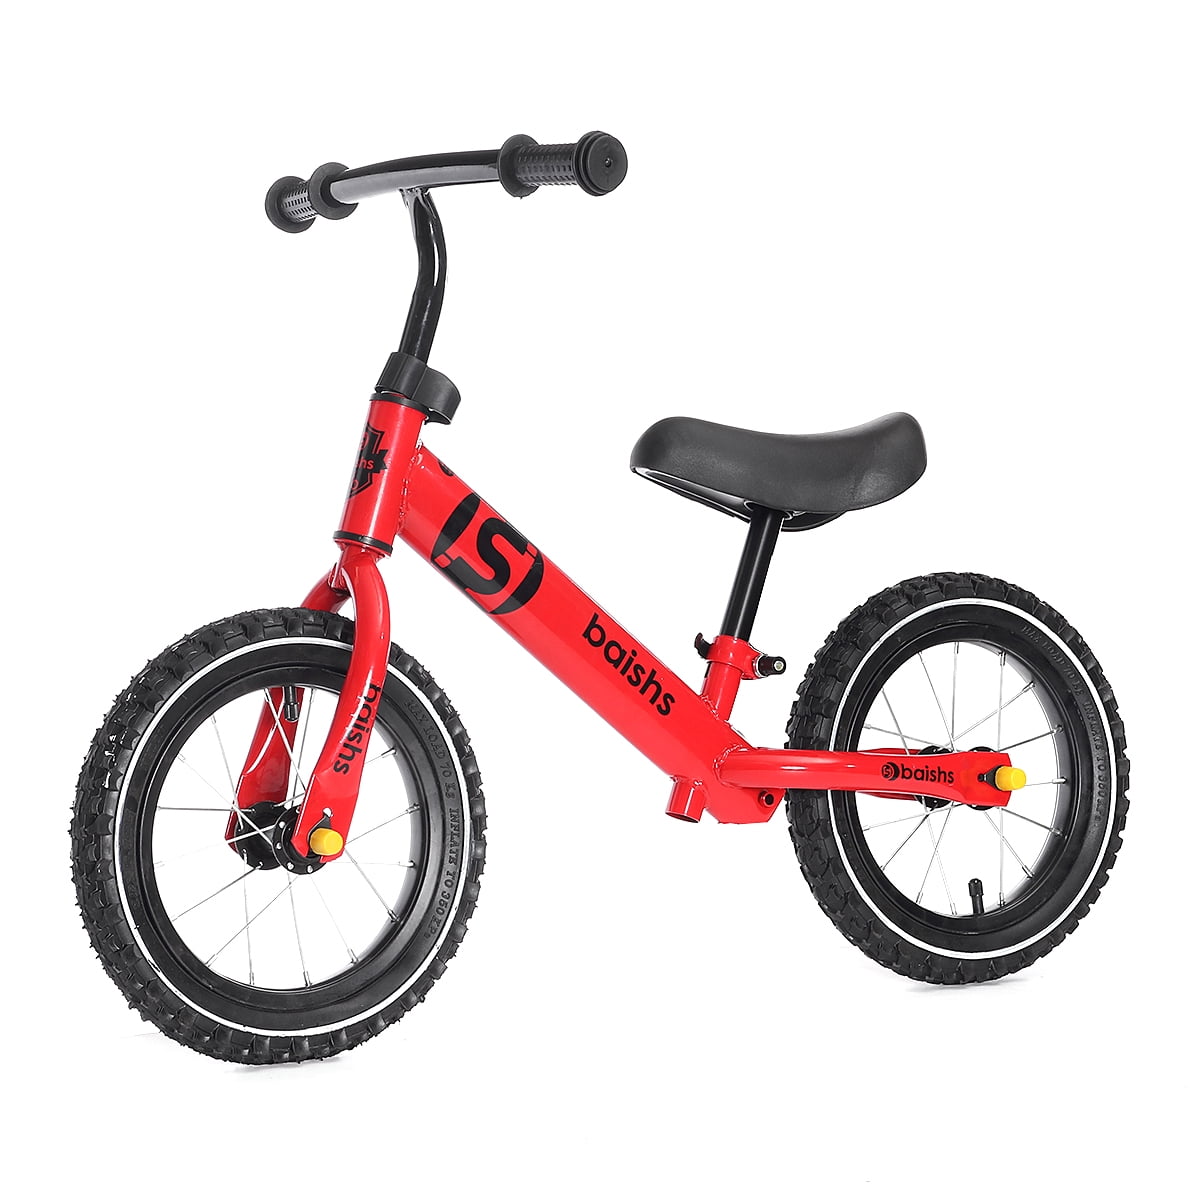 3 Colors 12'' Kids Balance Bike Pump Children Learn to Ride No-Pedal Inflatable Tire Xmas For 2-6 years old Kids and Toddlers